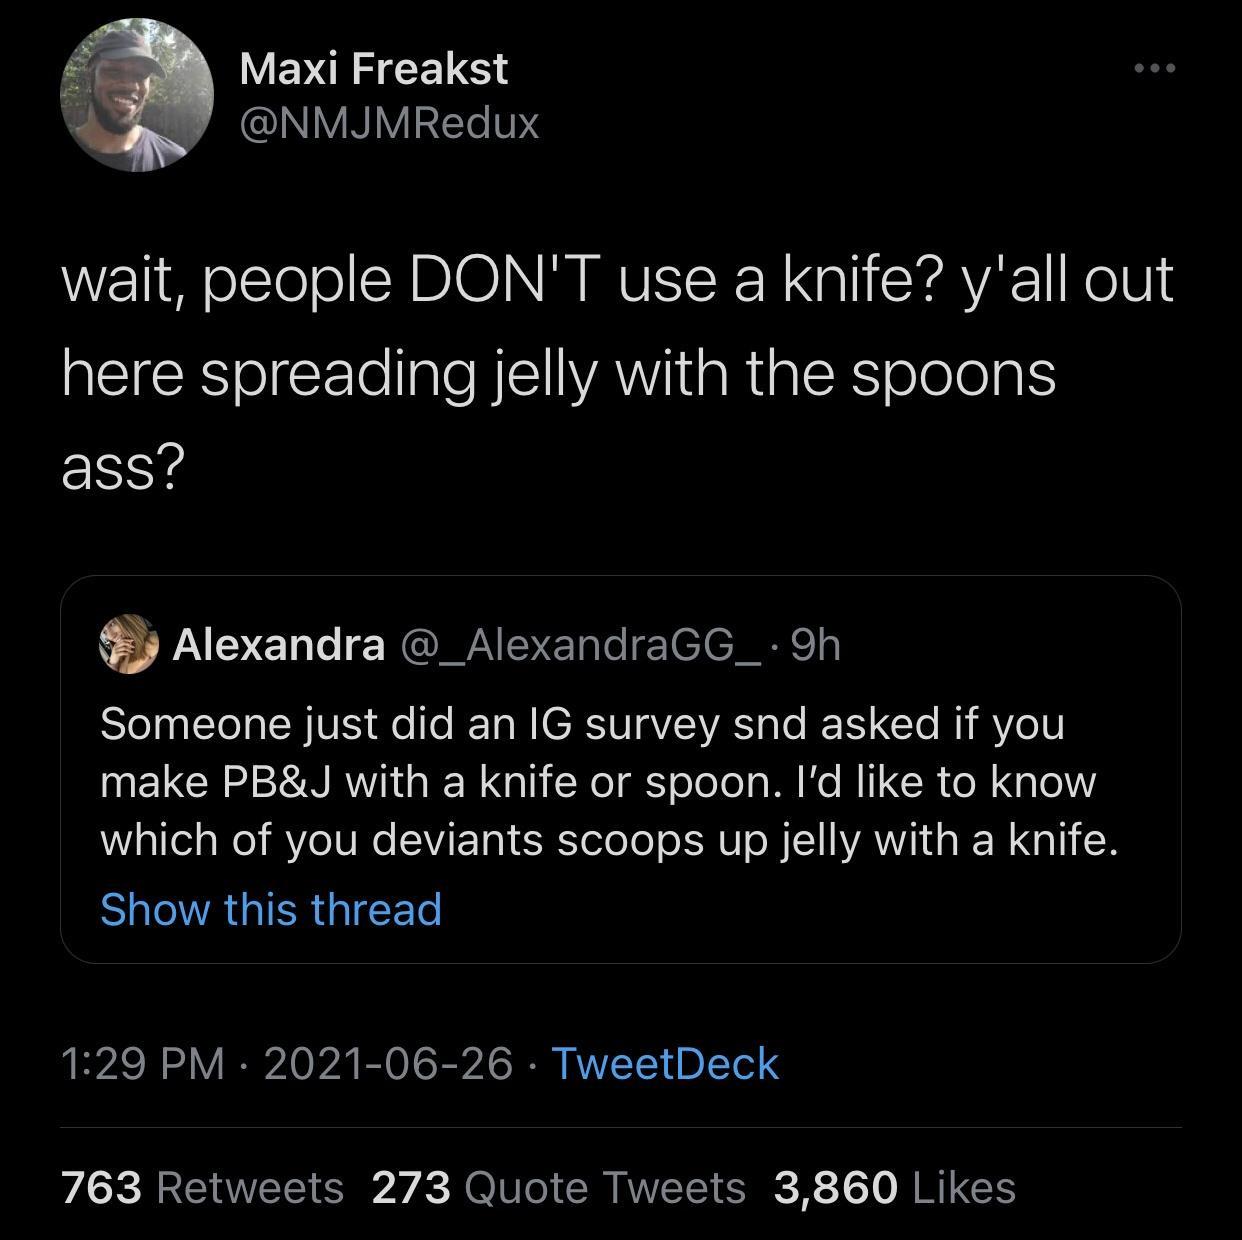 do you use a spoon ass or a knife?